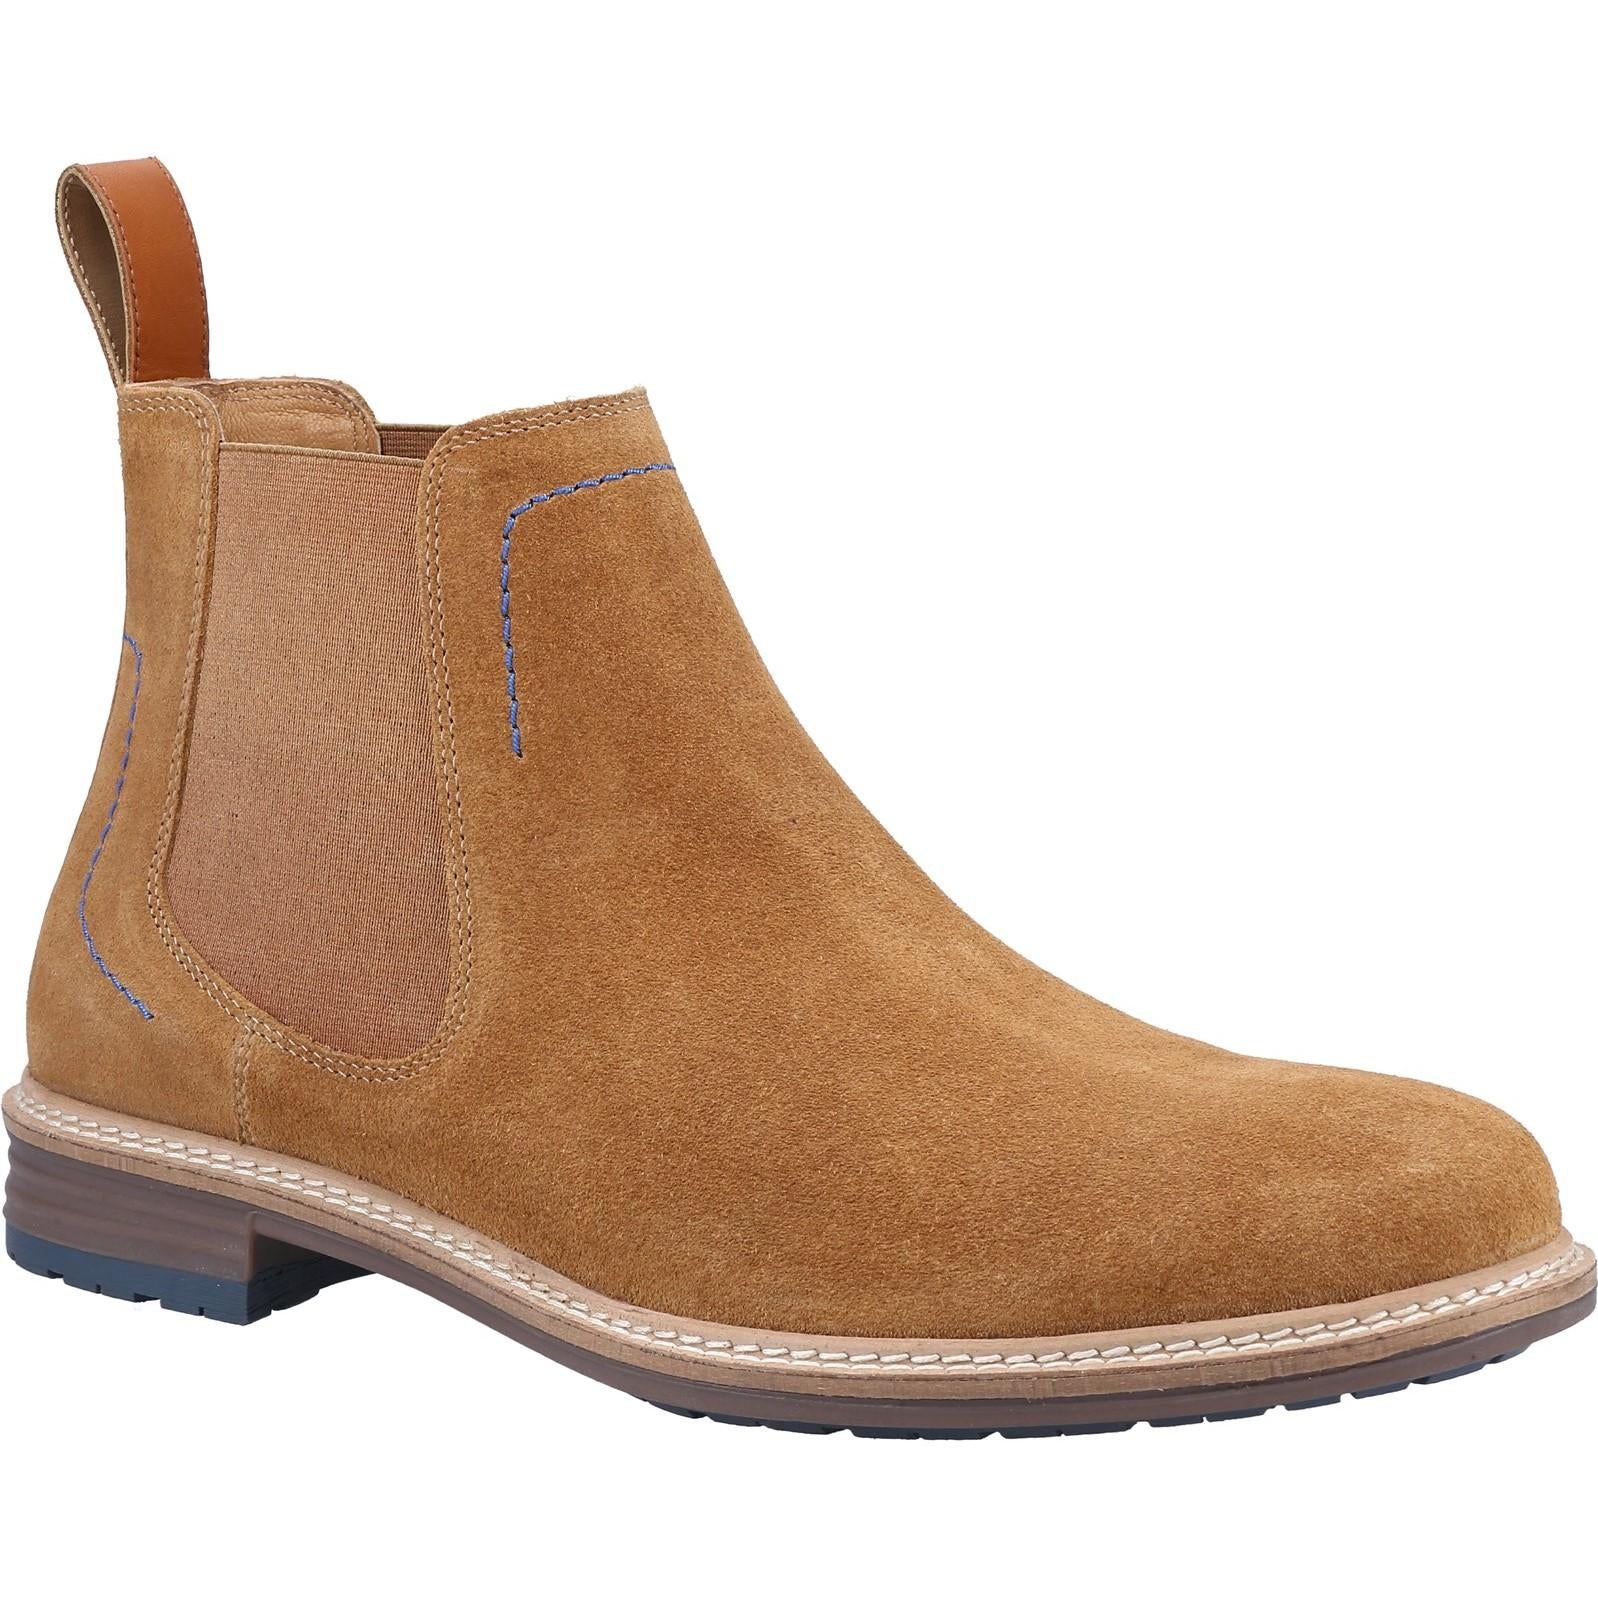 Hush Puppies Justin Suede Chelsea Boot